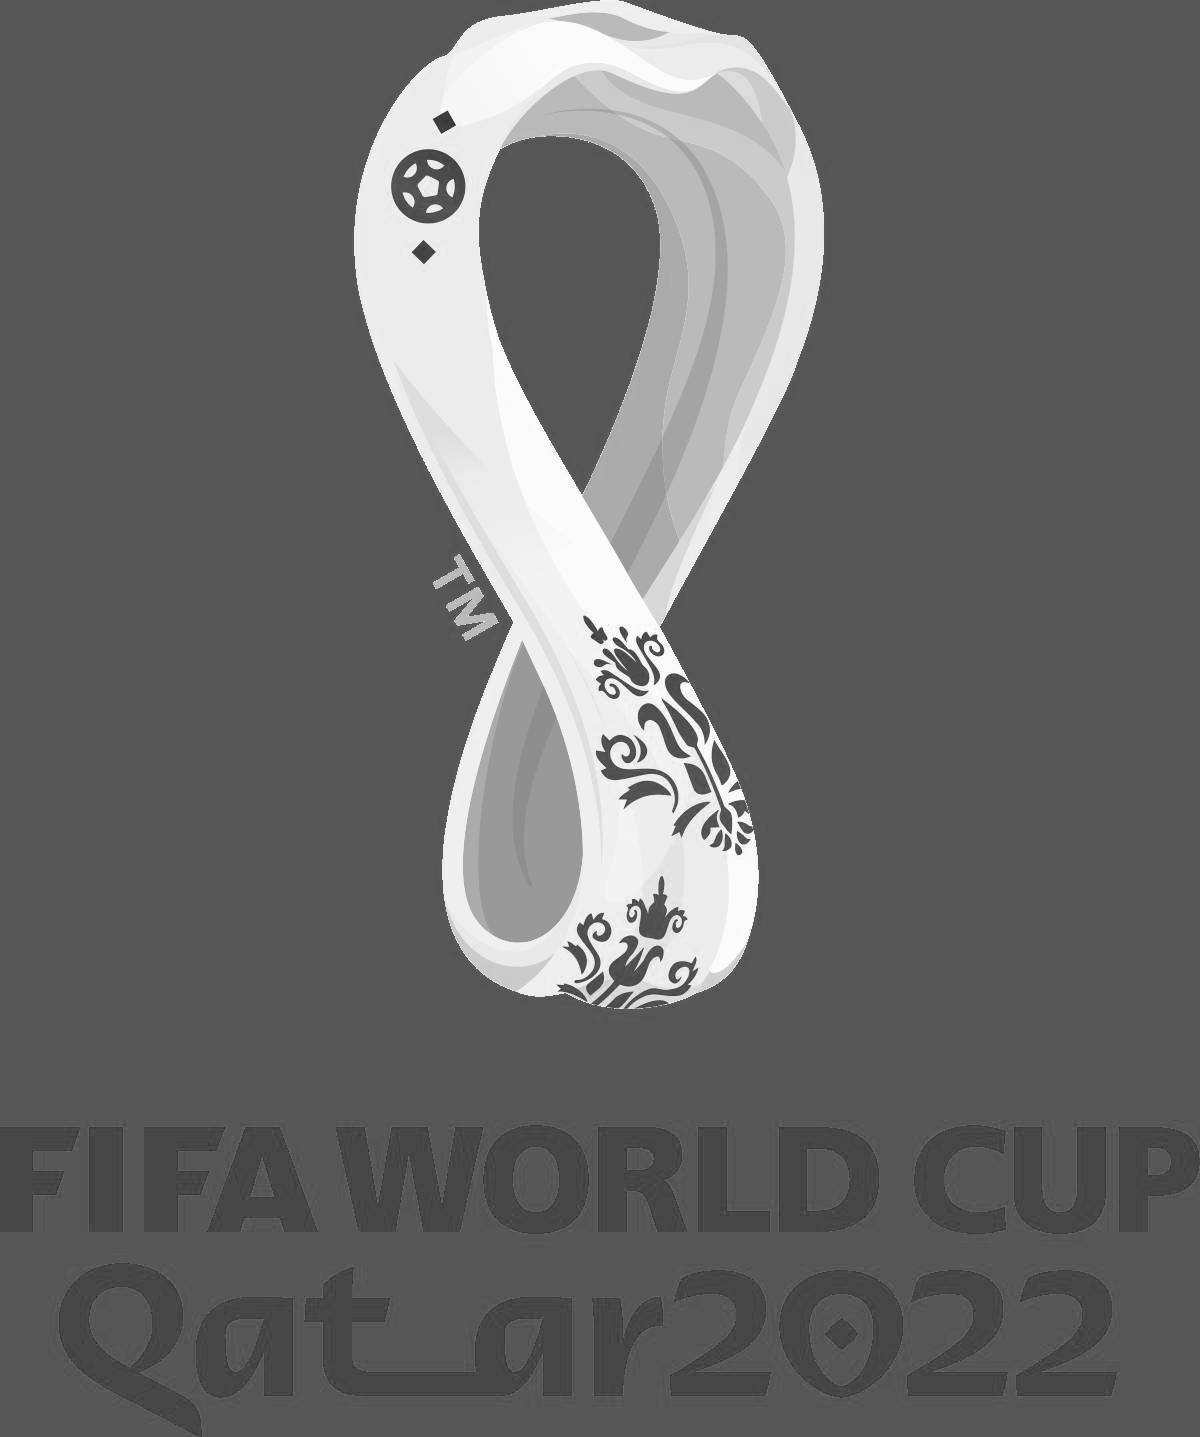 2022 World Cup awesome coloring book